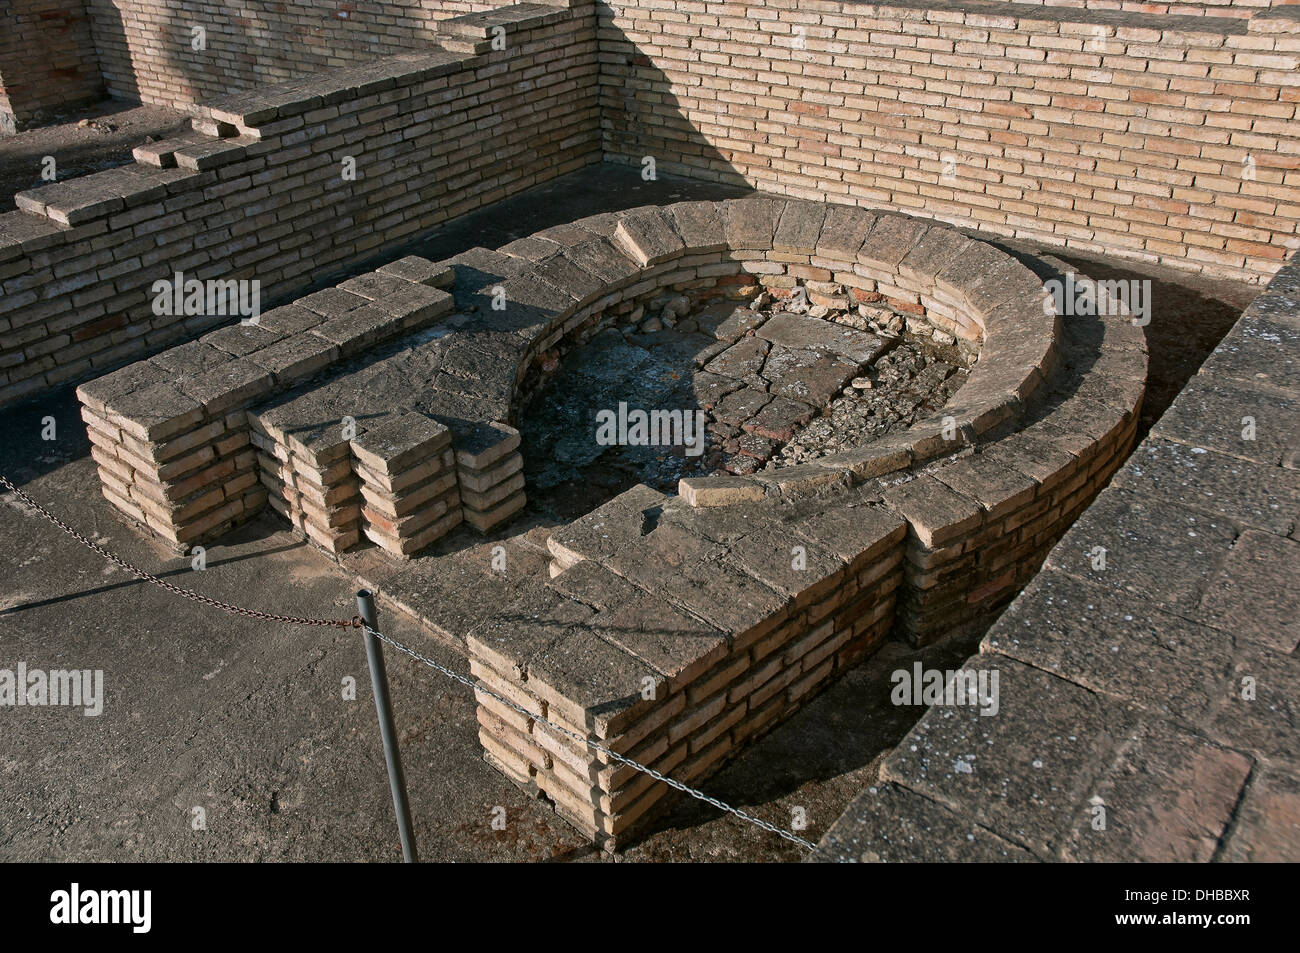 Bread oven, House of the Birds, Roman ruins of Italica, Santiponce, Seville-province, Region of Andalusia, Spain, Europe Stock Photo